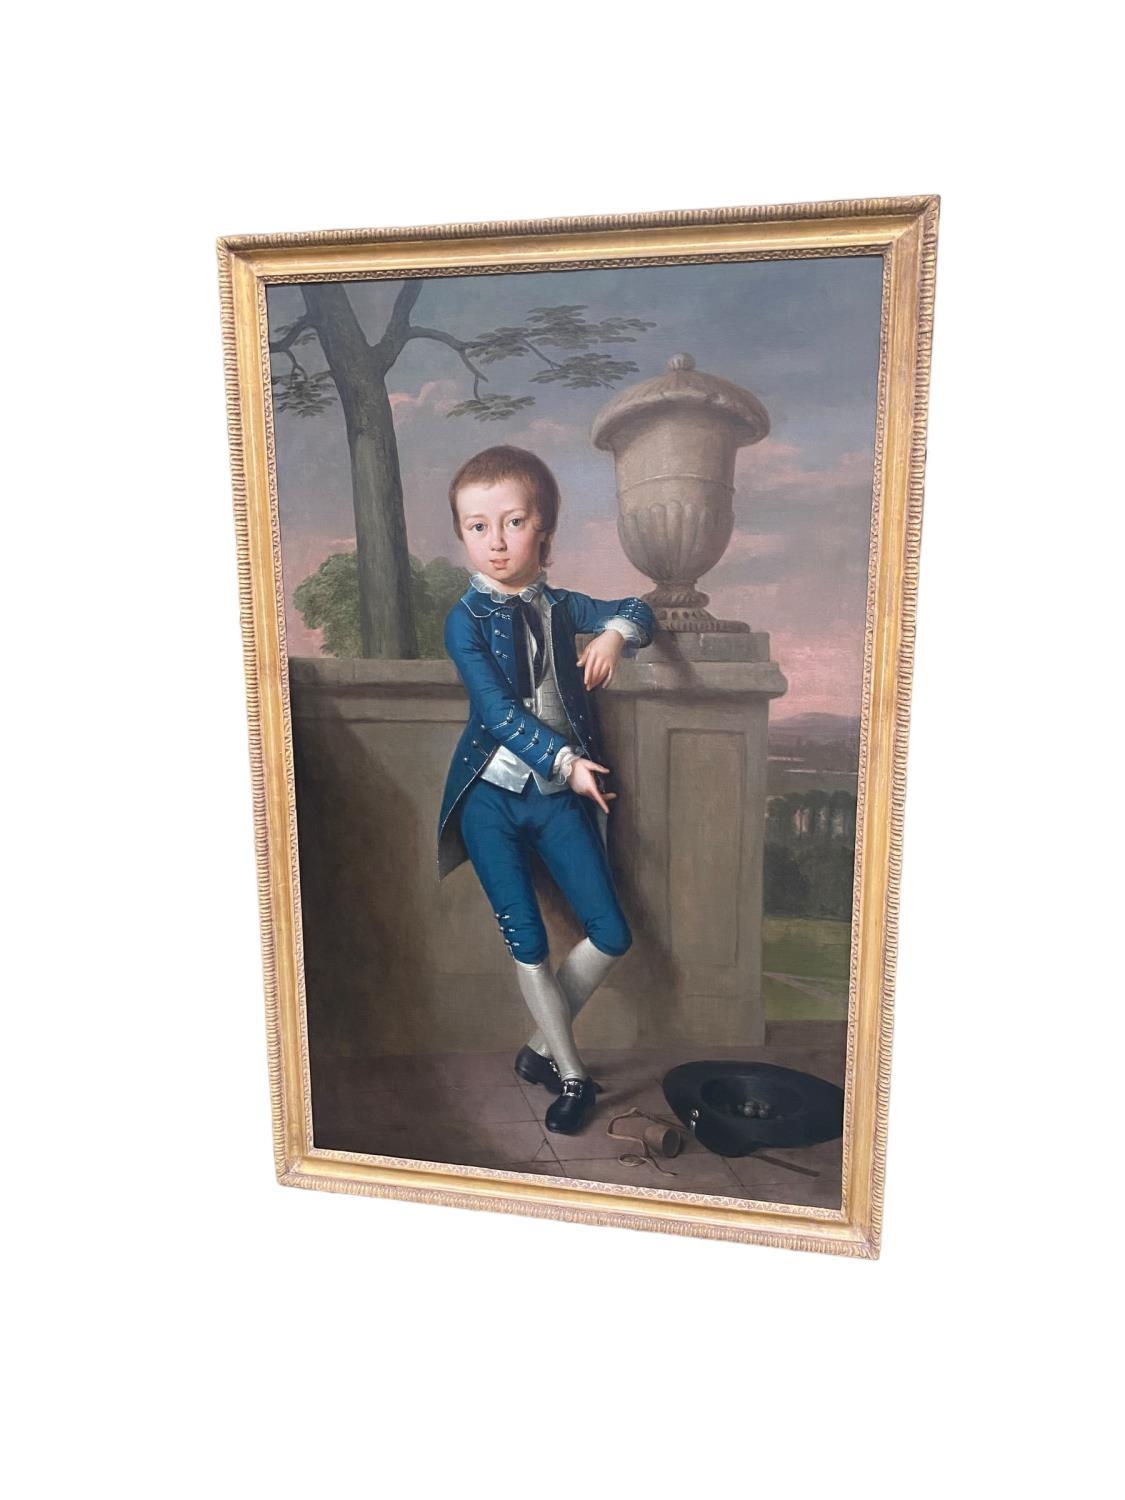 Attributed to Hugh Barron (1745 - 1791), Portrait of a Boy in Blue in an architectural Landscape, - Image 9 of 10